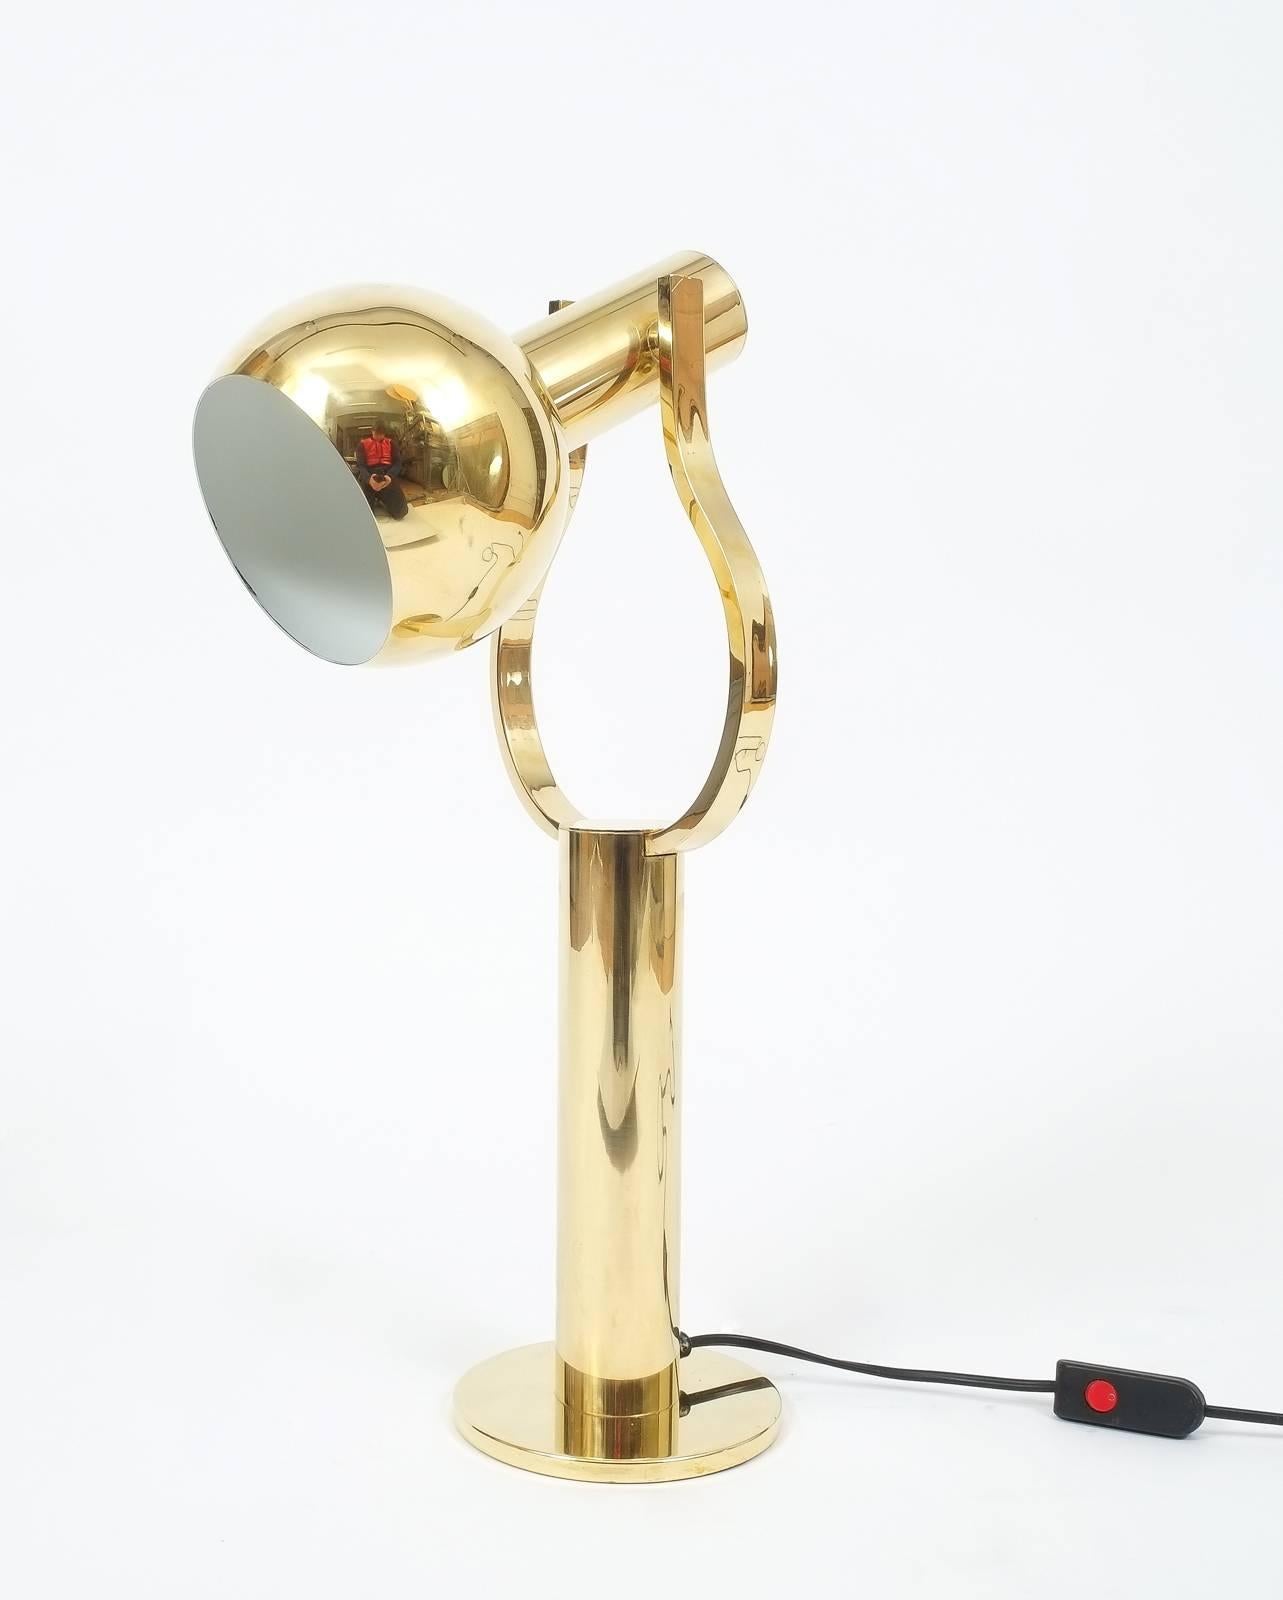 Pair of Articulate Refurbished Brass Desk Lamps by Staff, Germany, 1970 (Poliert)